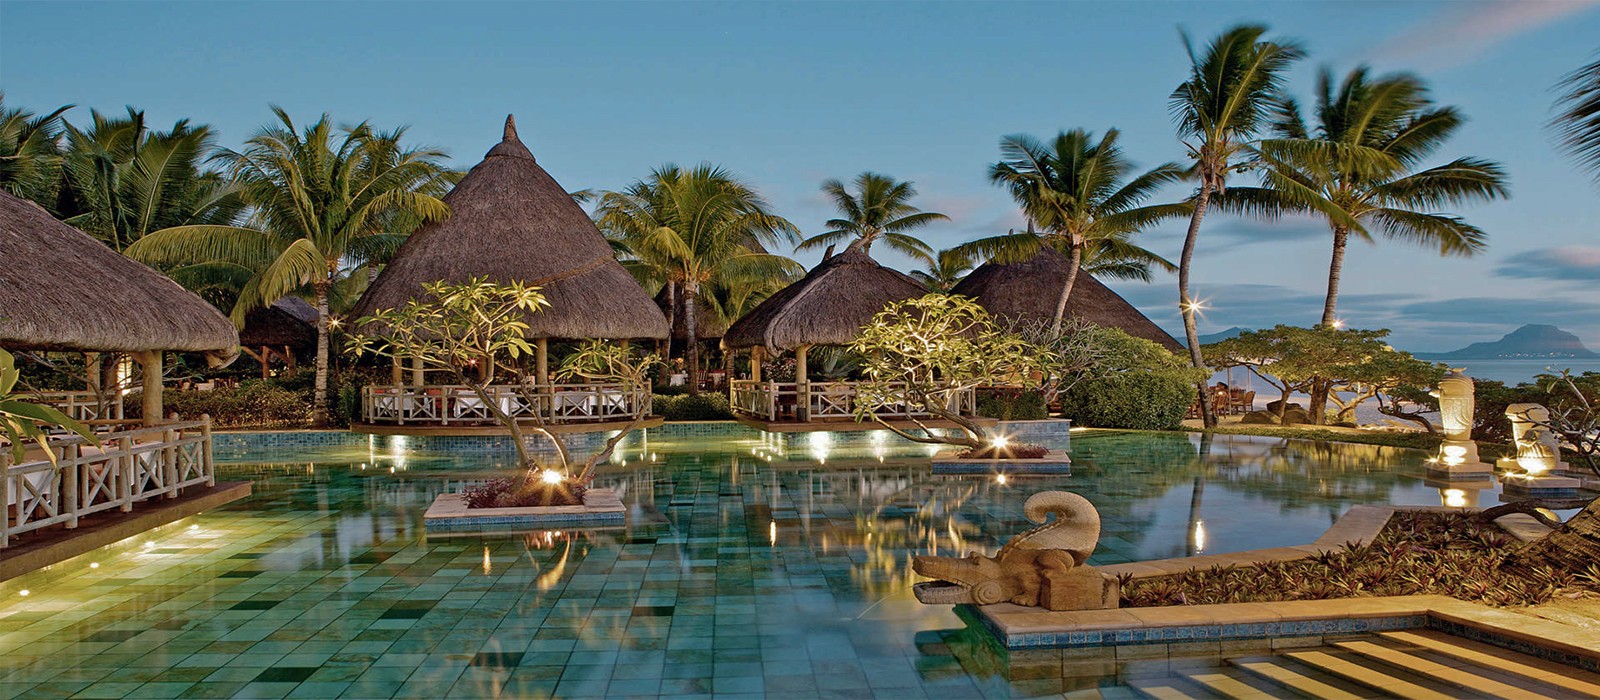 La Pirogue Resort and Spa - Luxury Mauritius Holiday Packages - header1